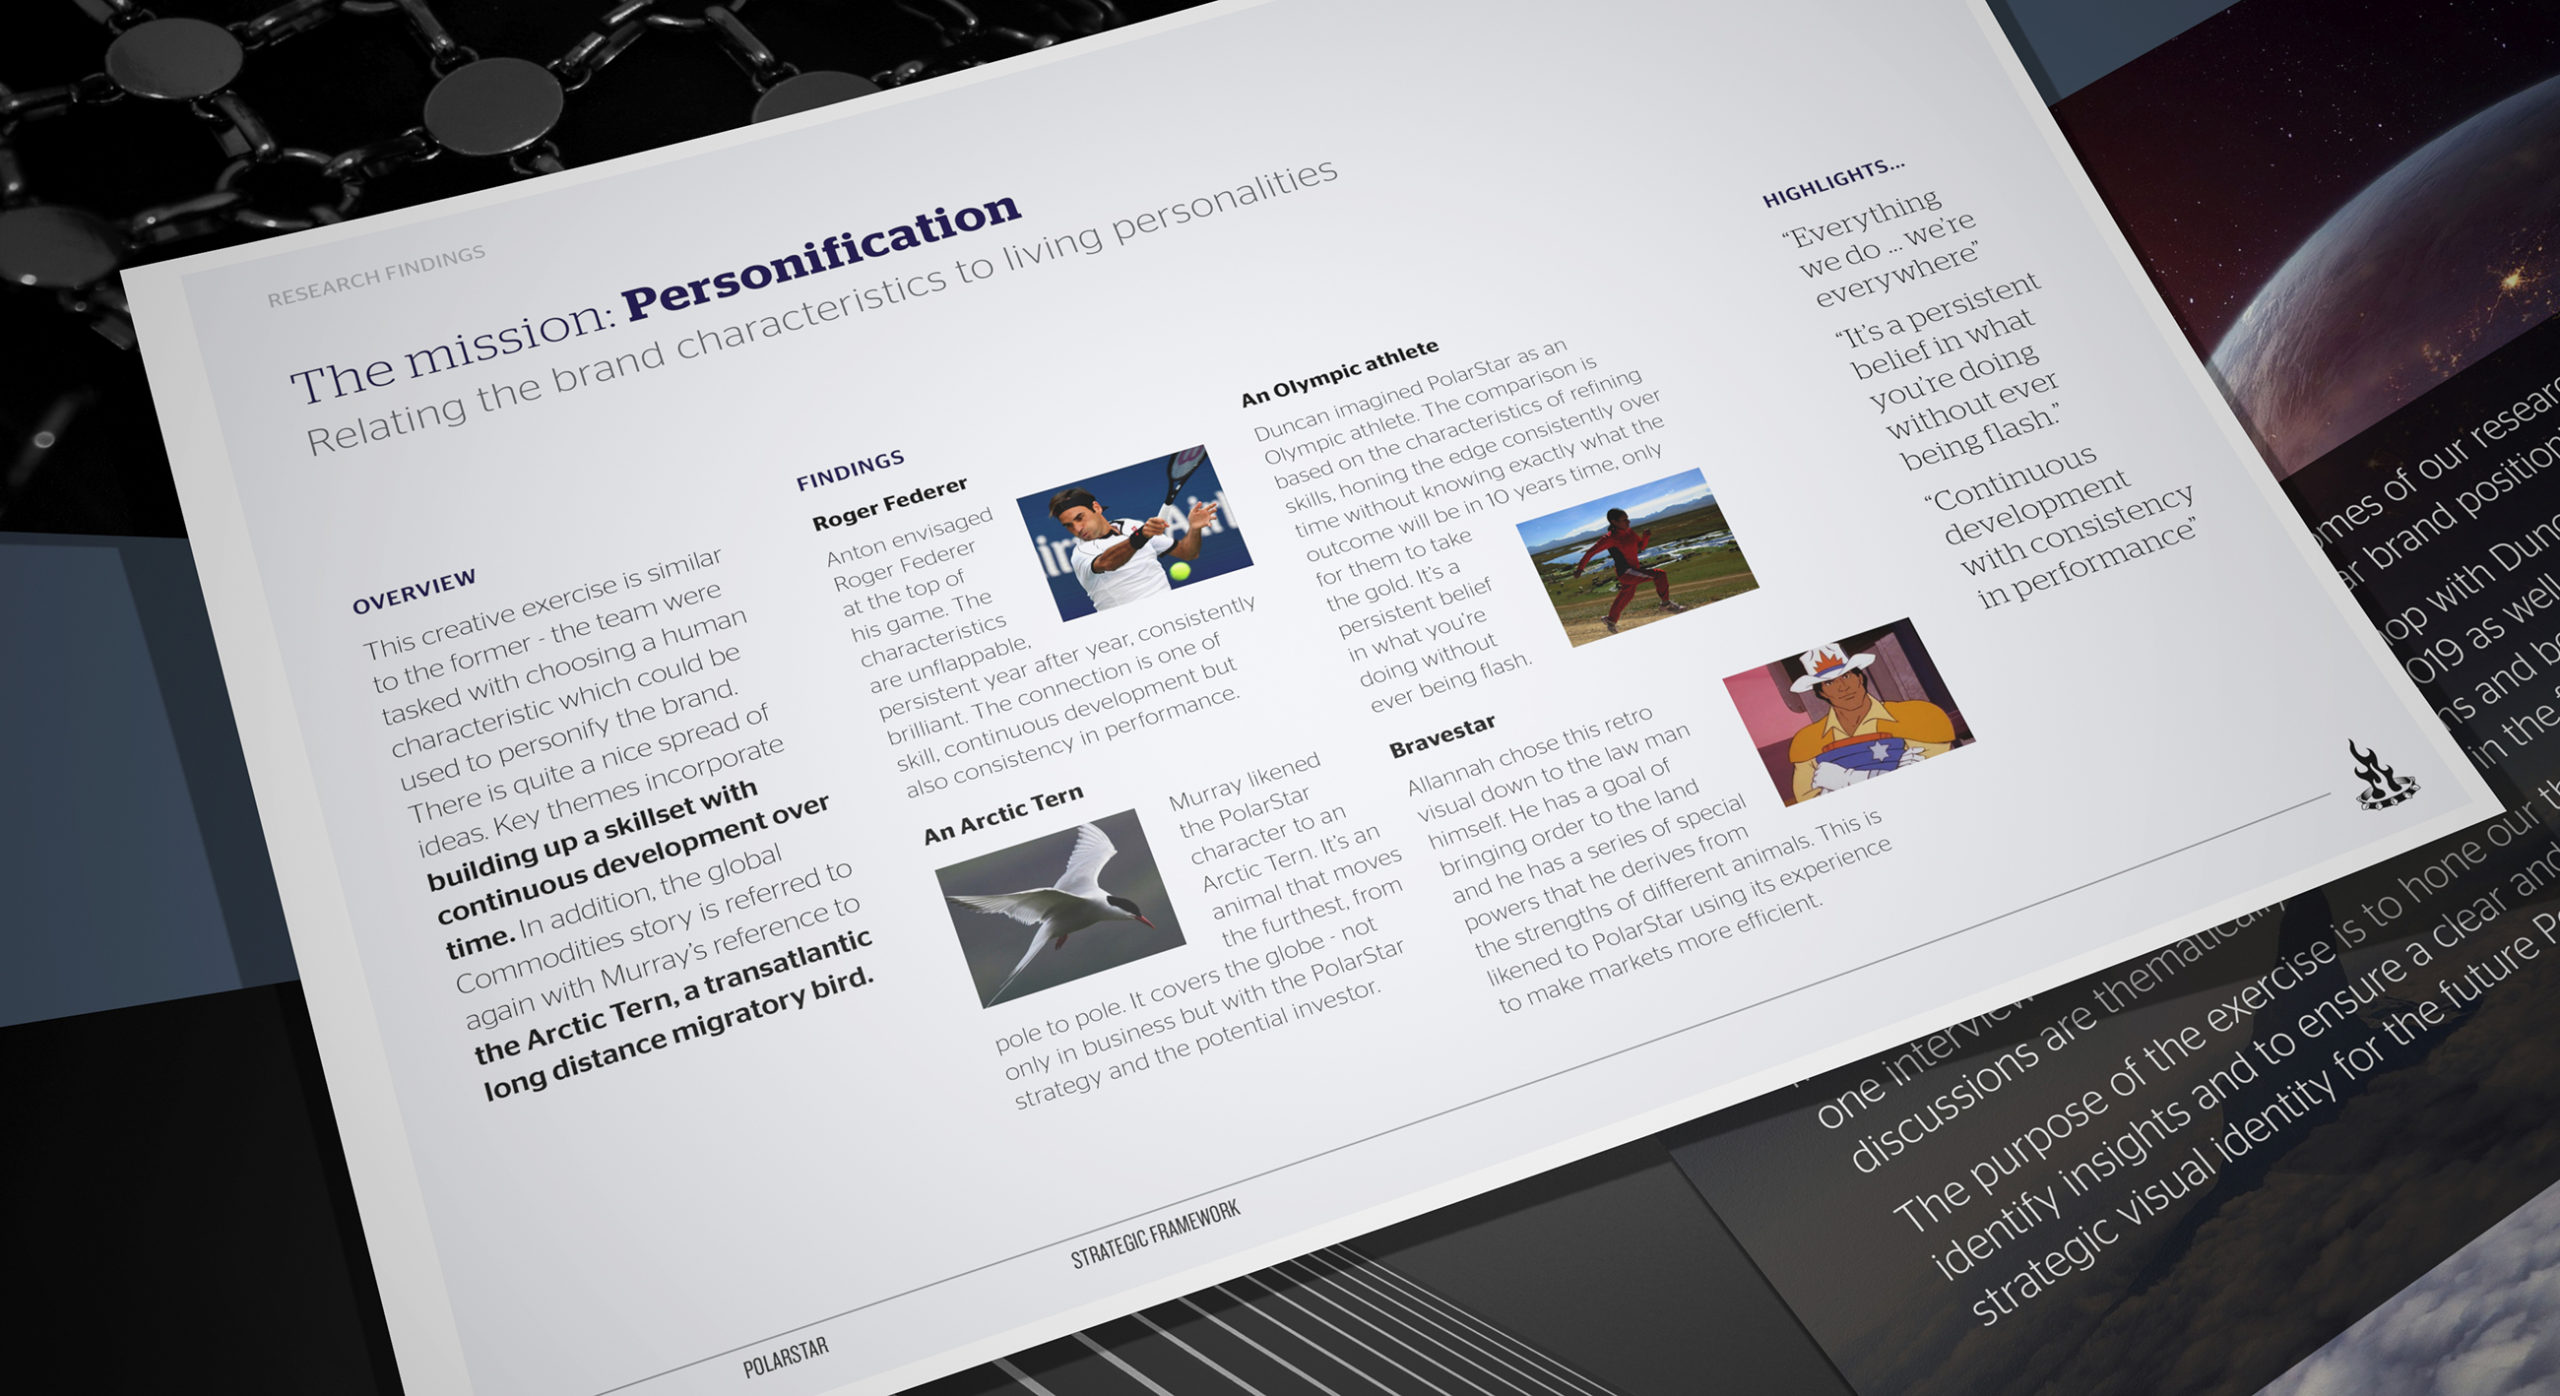 We established key personalities and brand archetypes which informed the overall creative direction.